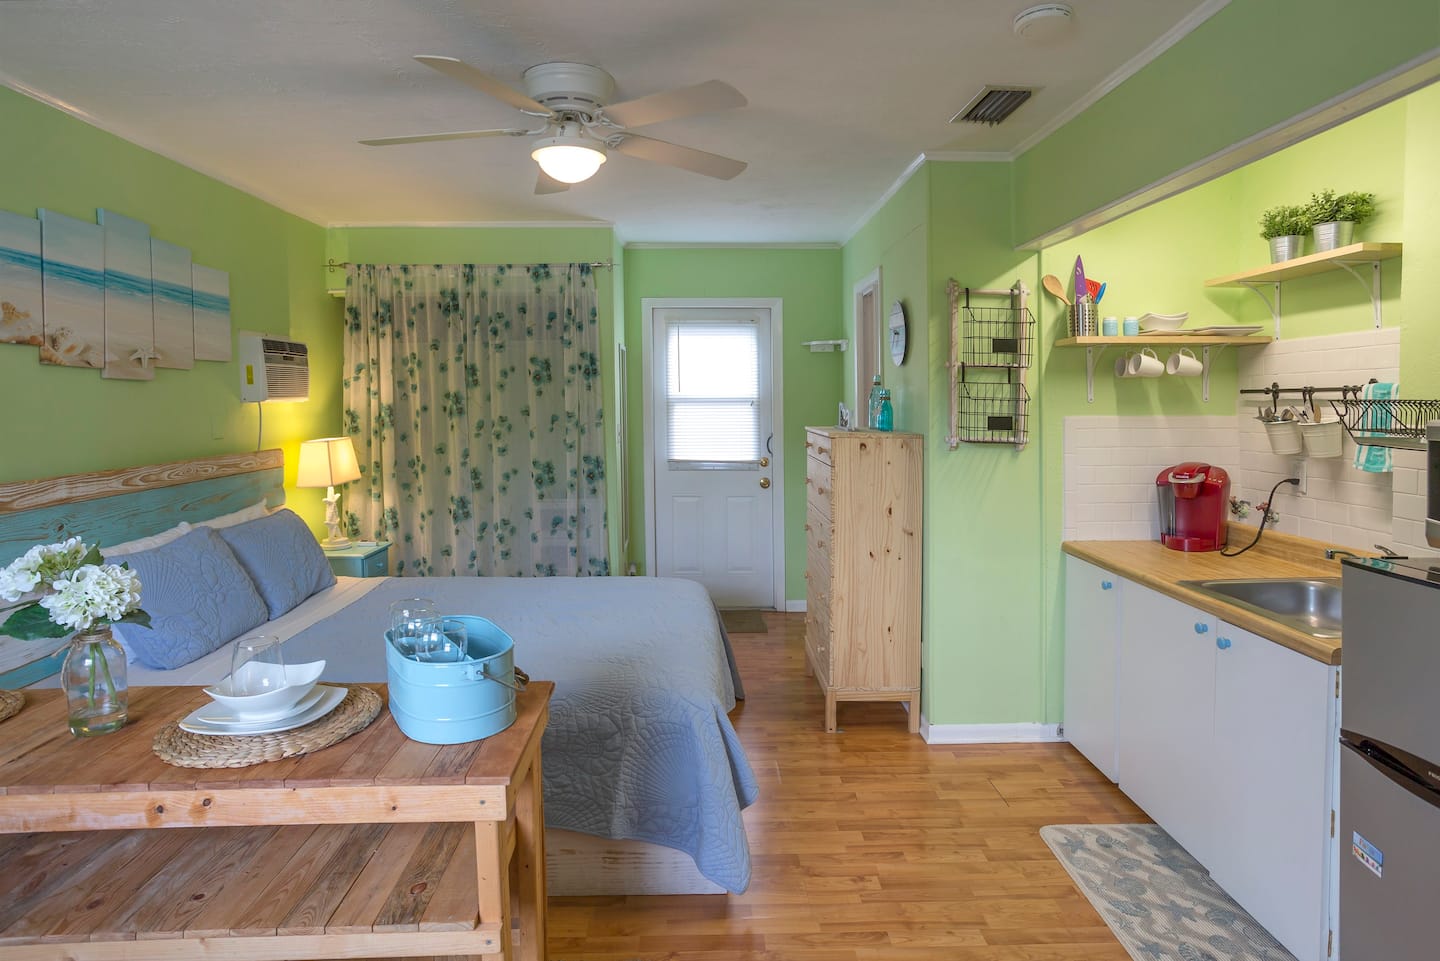 Gulfport Studio, one of the best Airbnbs in Florida